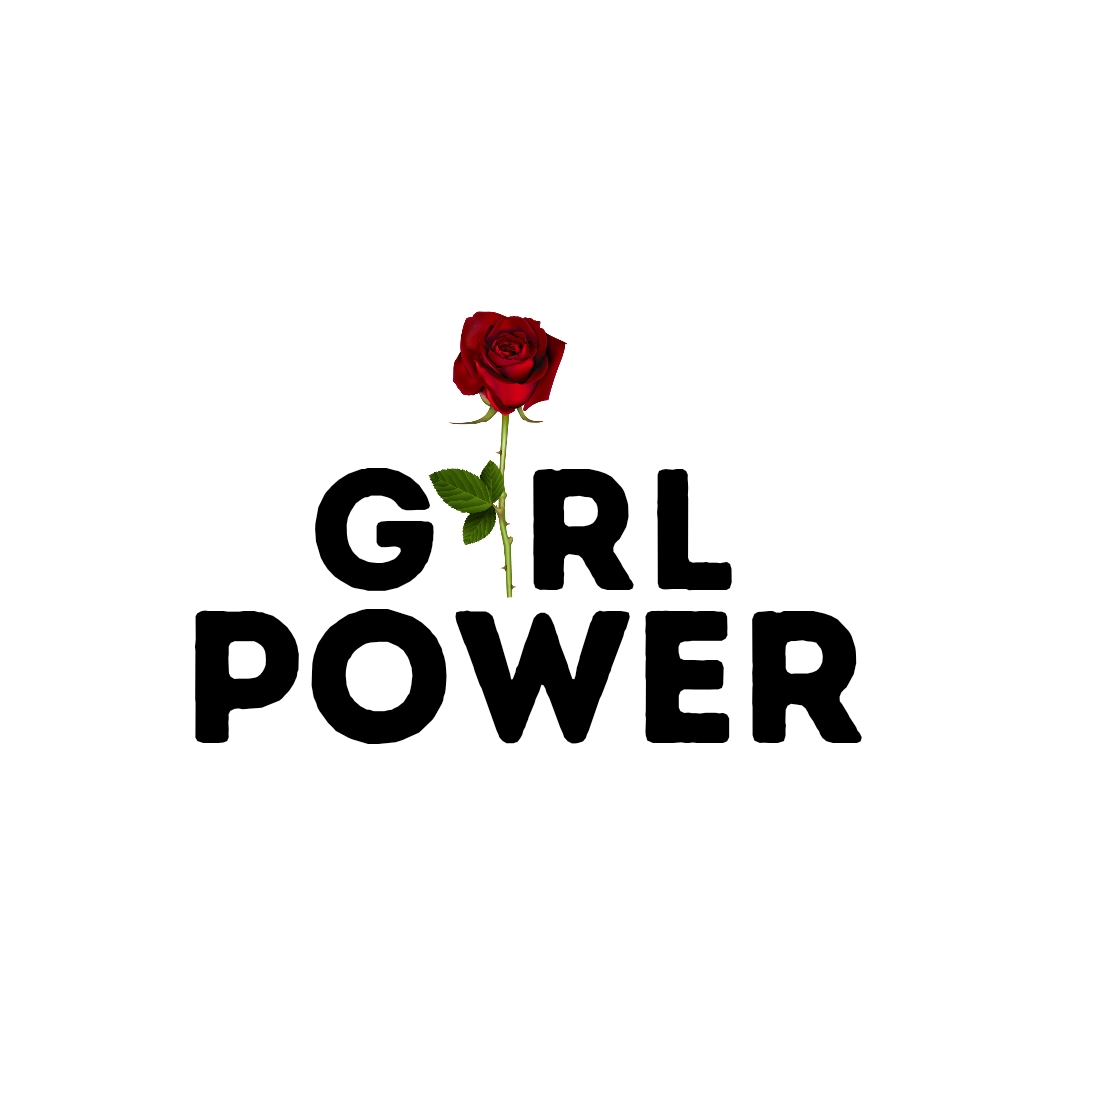 SVG for T Shirt, GIRL POWER SVG, GIRL POWER PNG cover image.